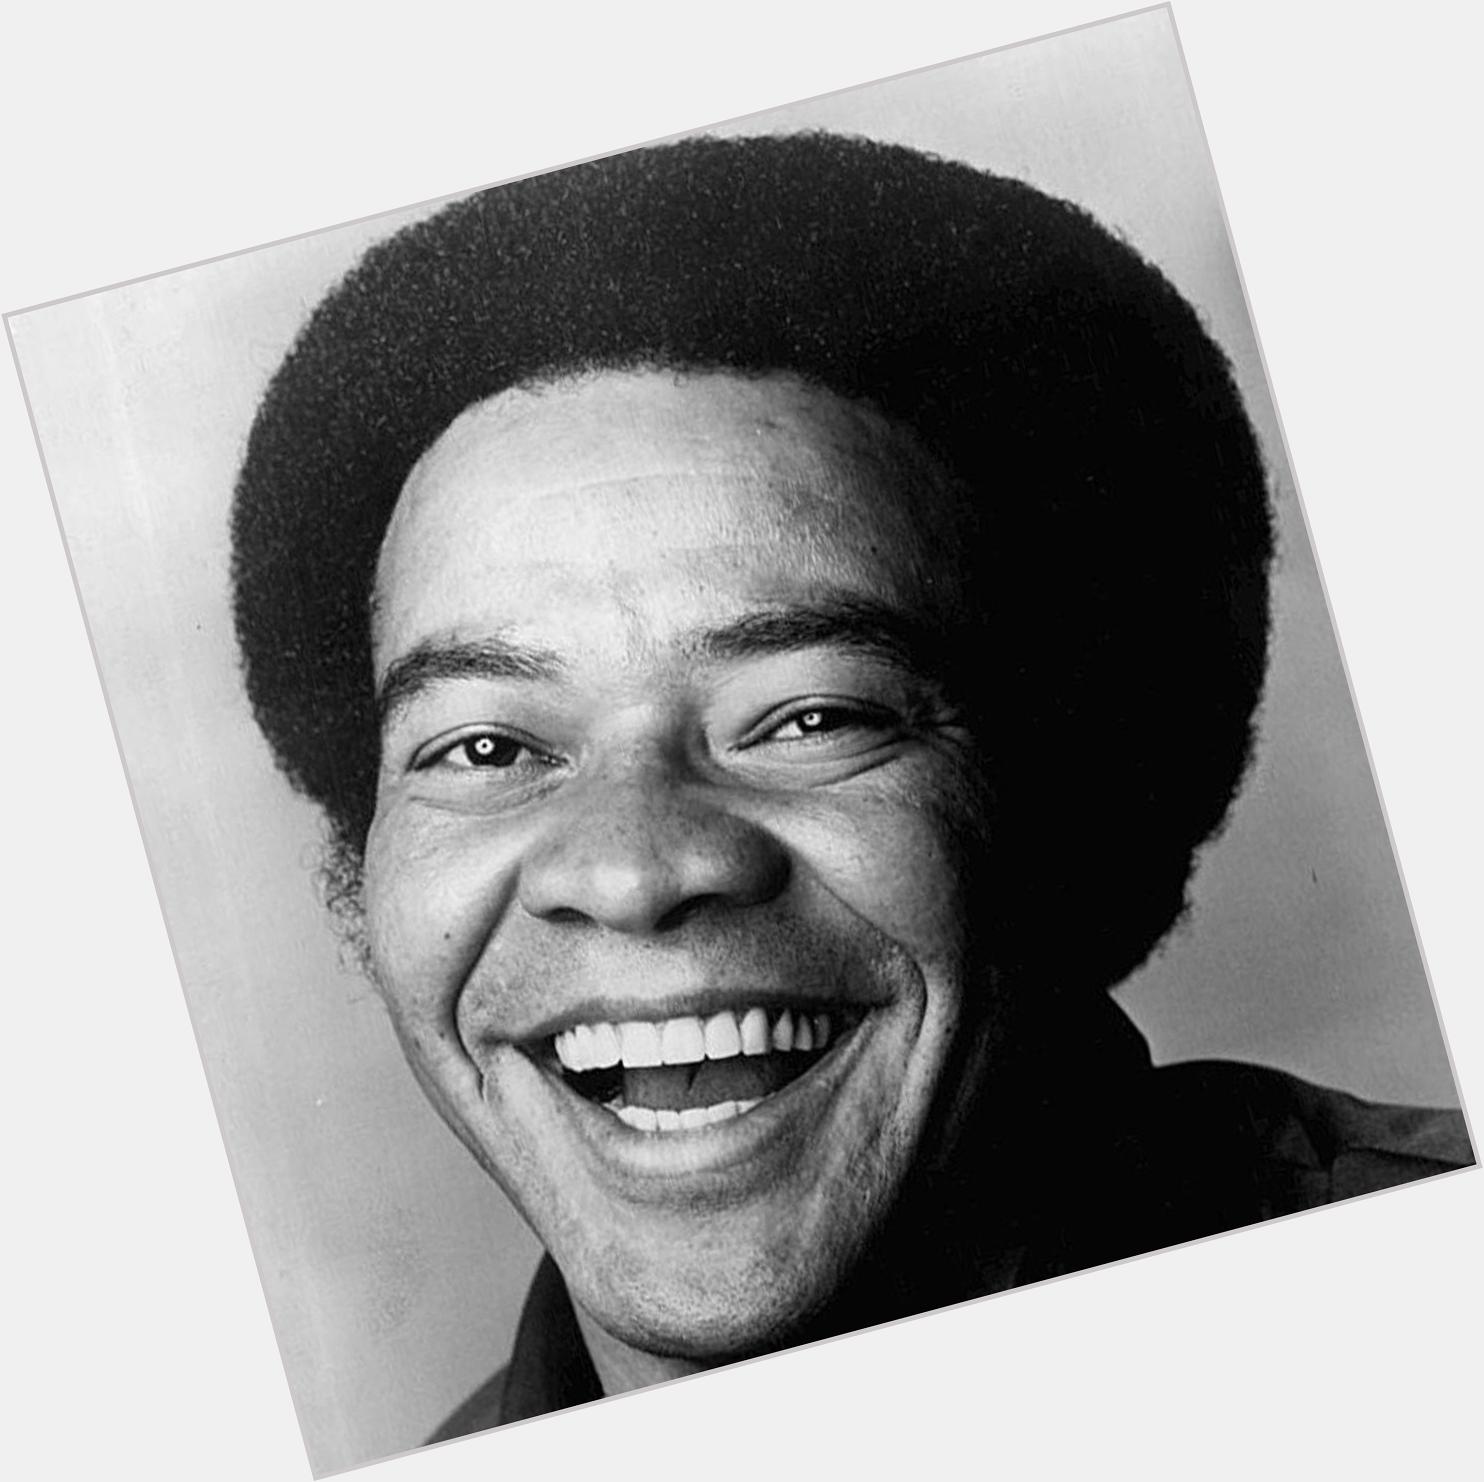 Happy Independence Day everyone, and Happy Birthday Bill Withers who was born on this day in 1938! 